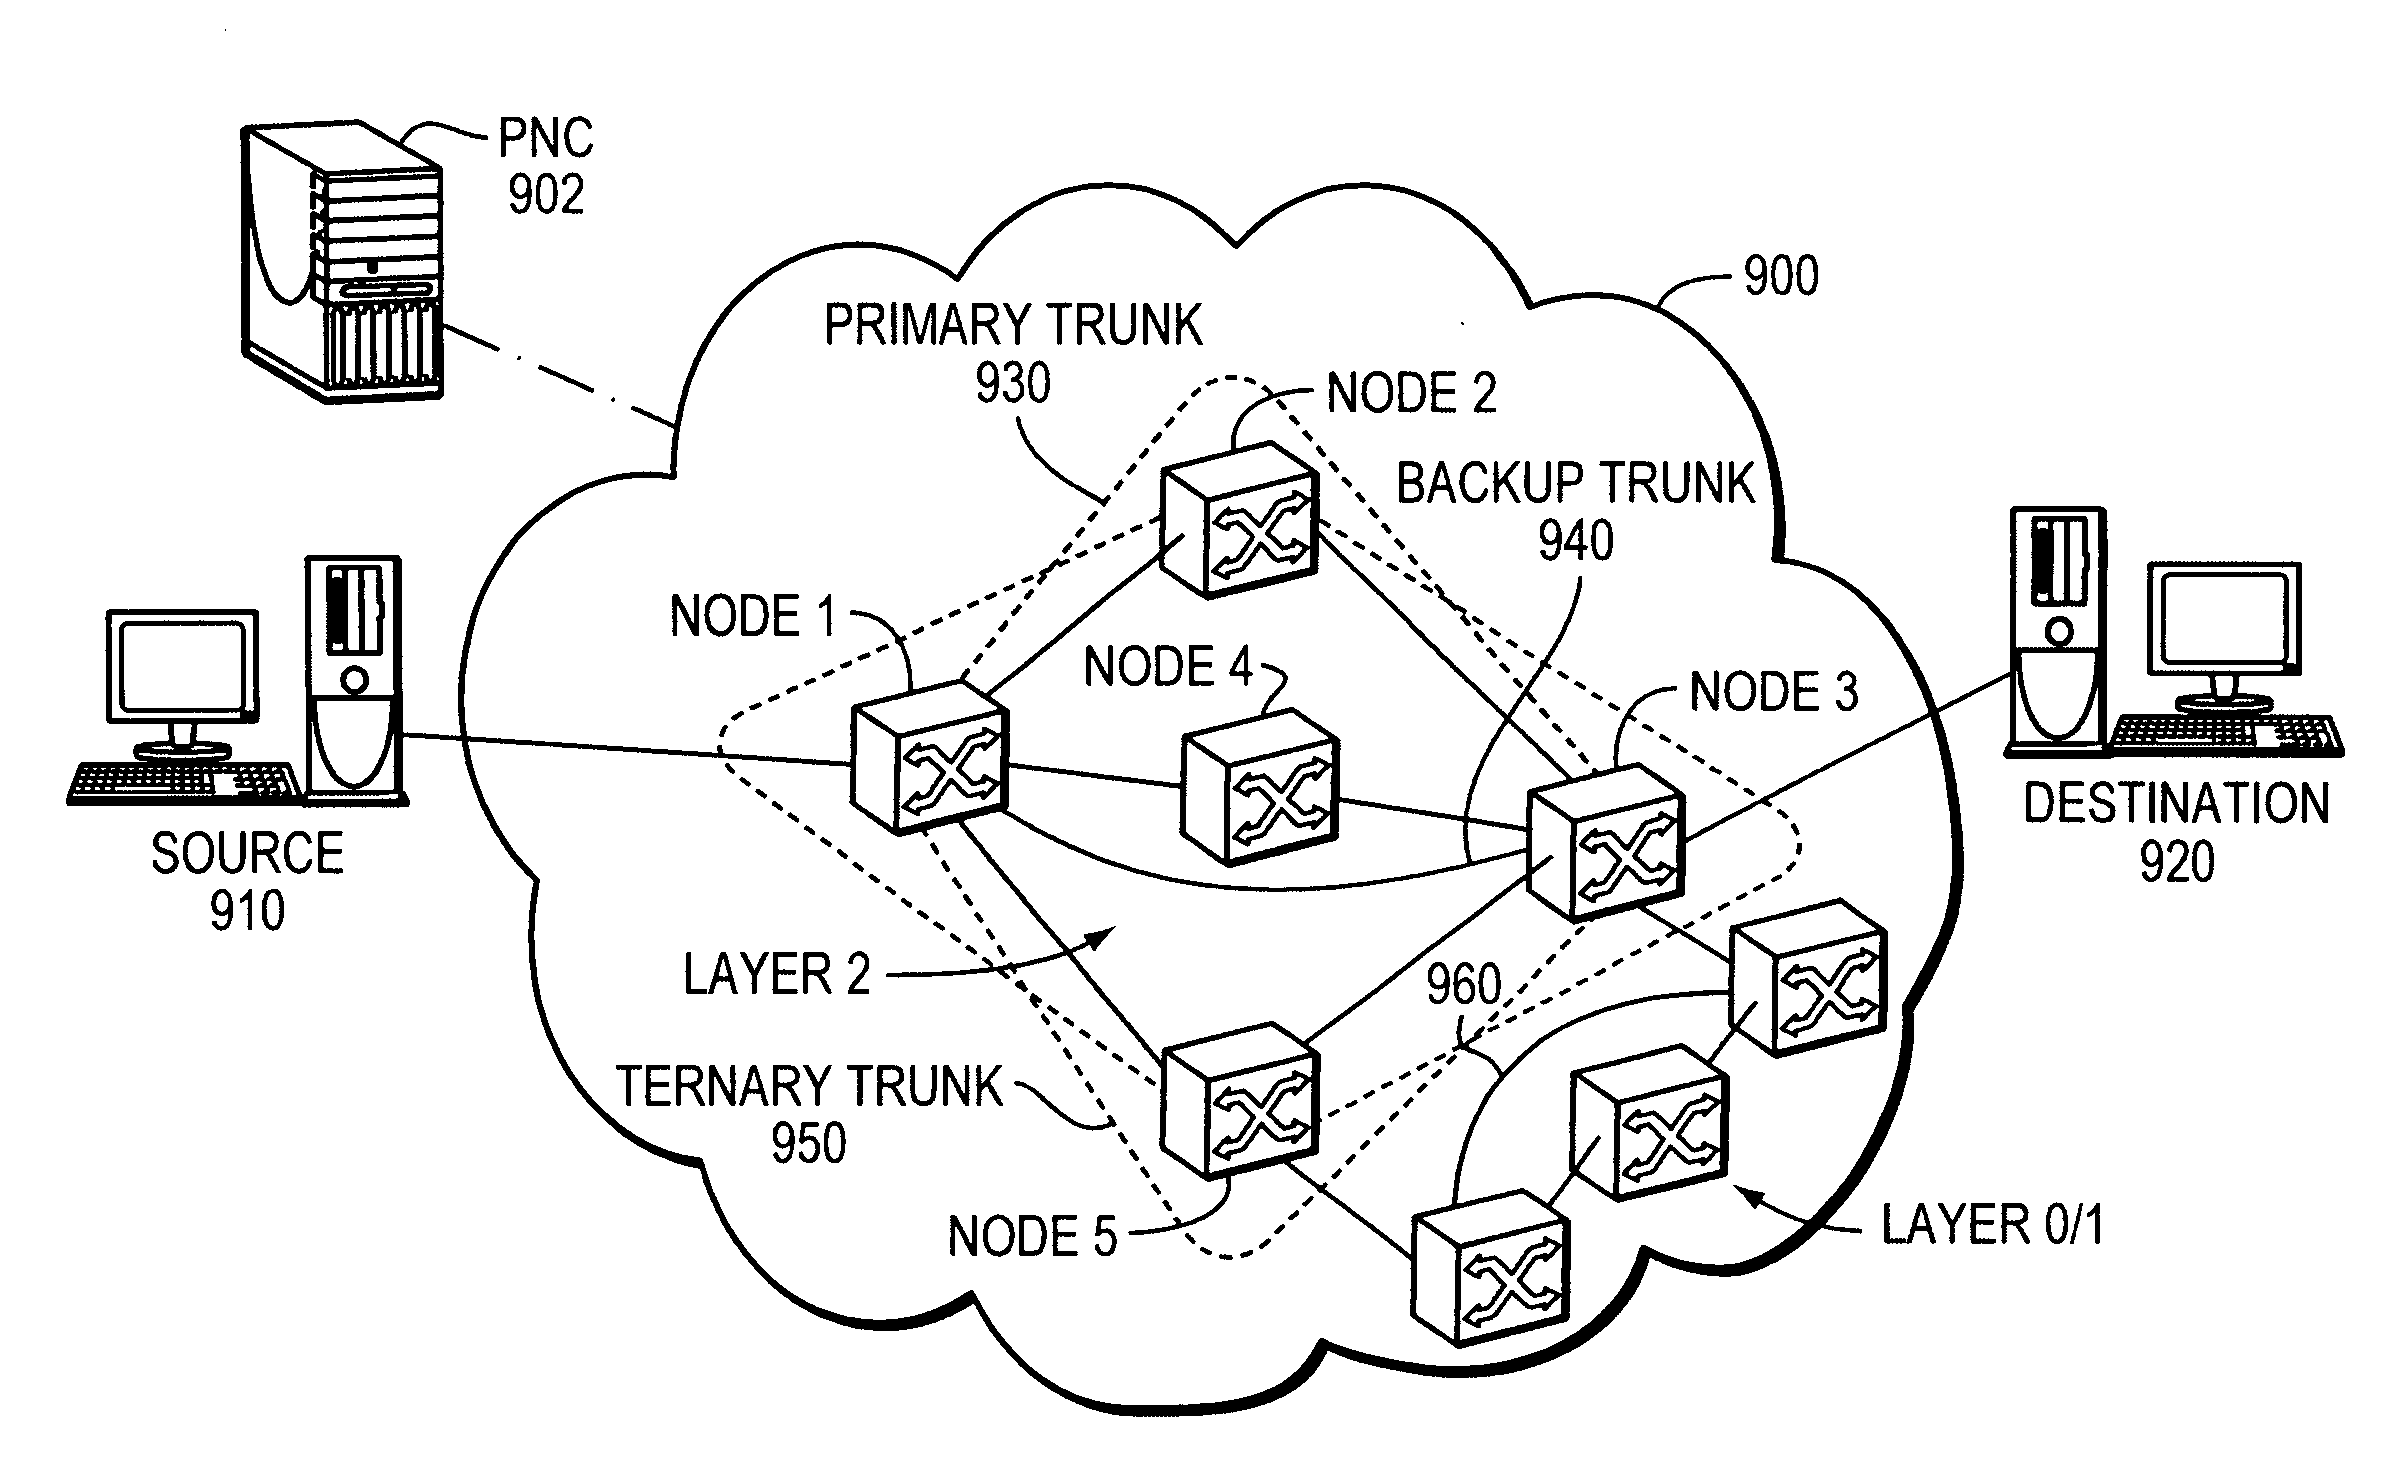 Software control plane for switches and routers